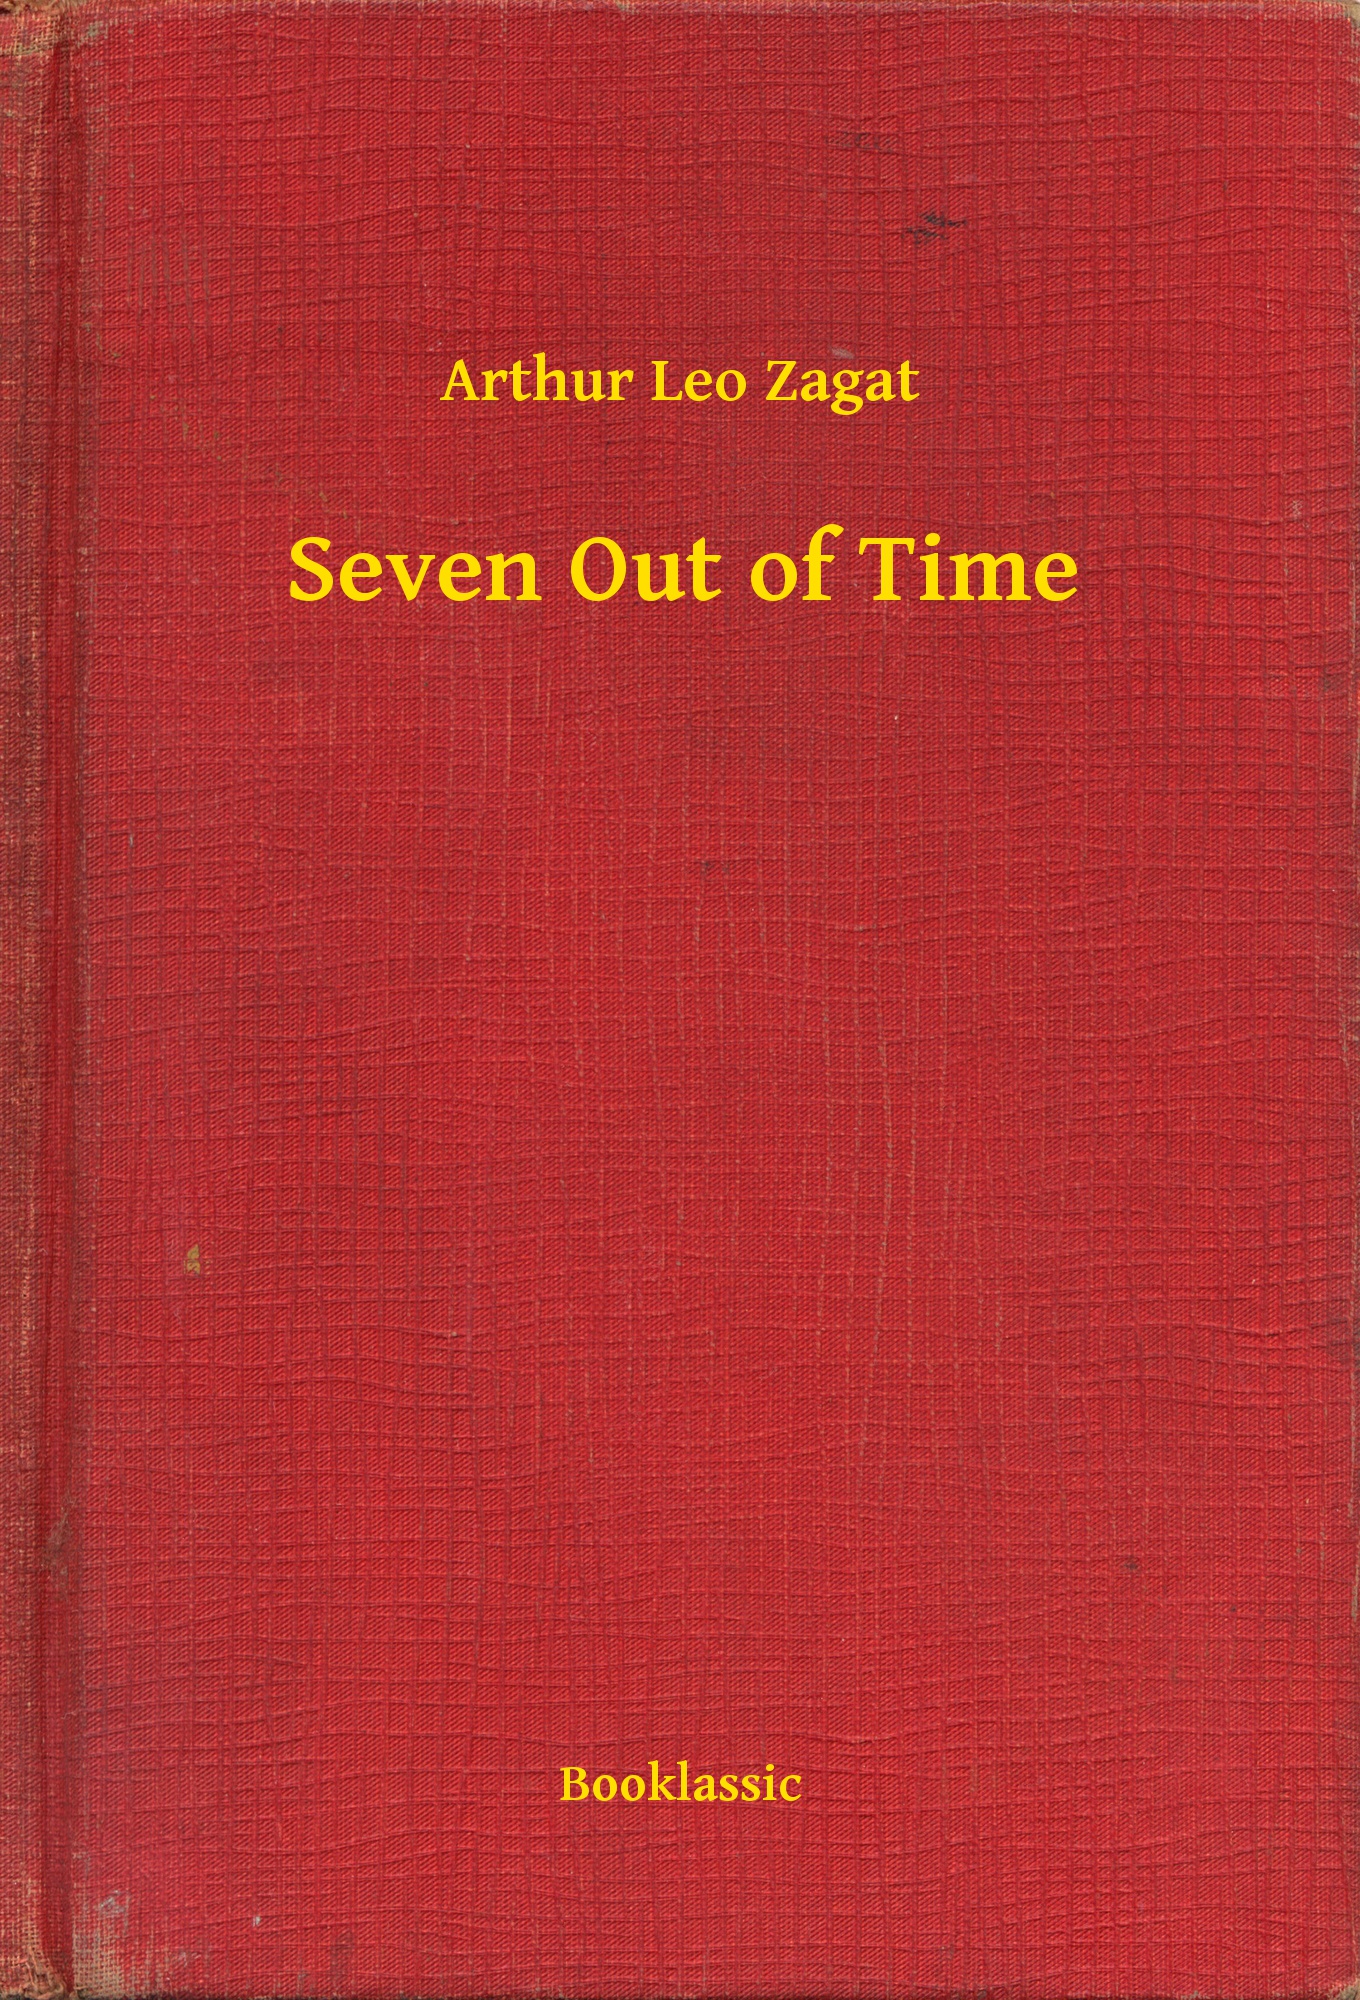 Seven Out of Time